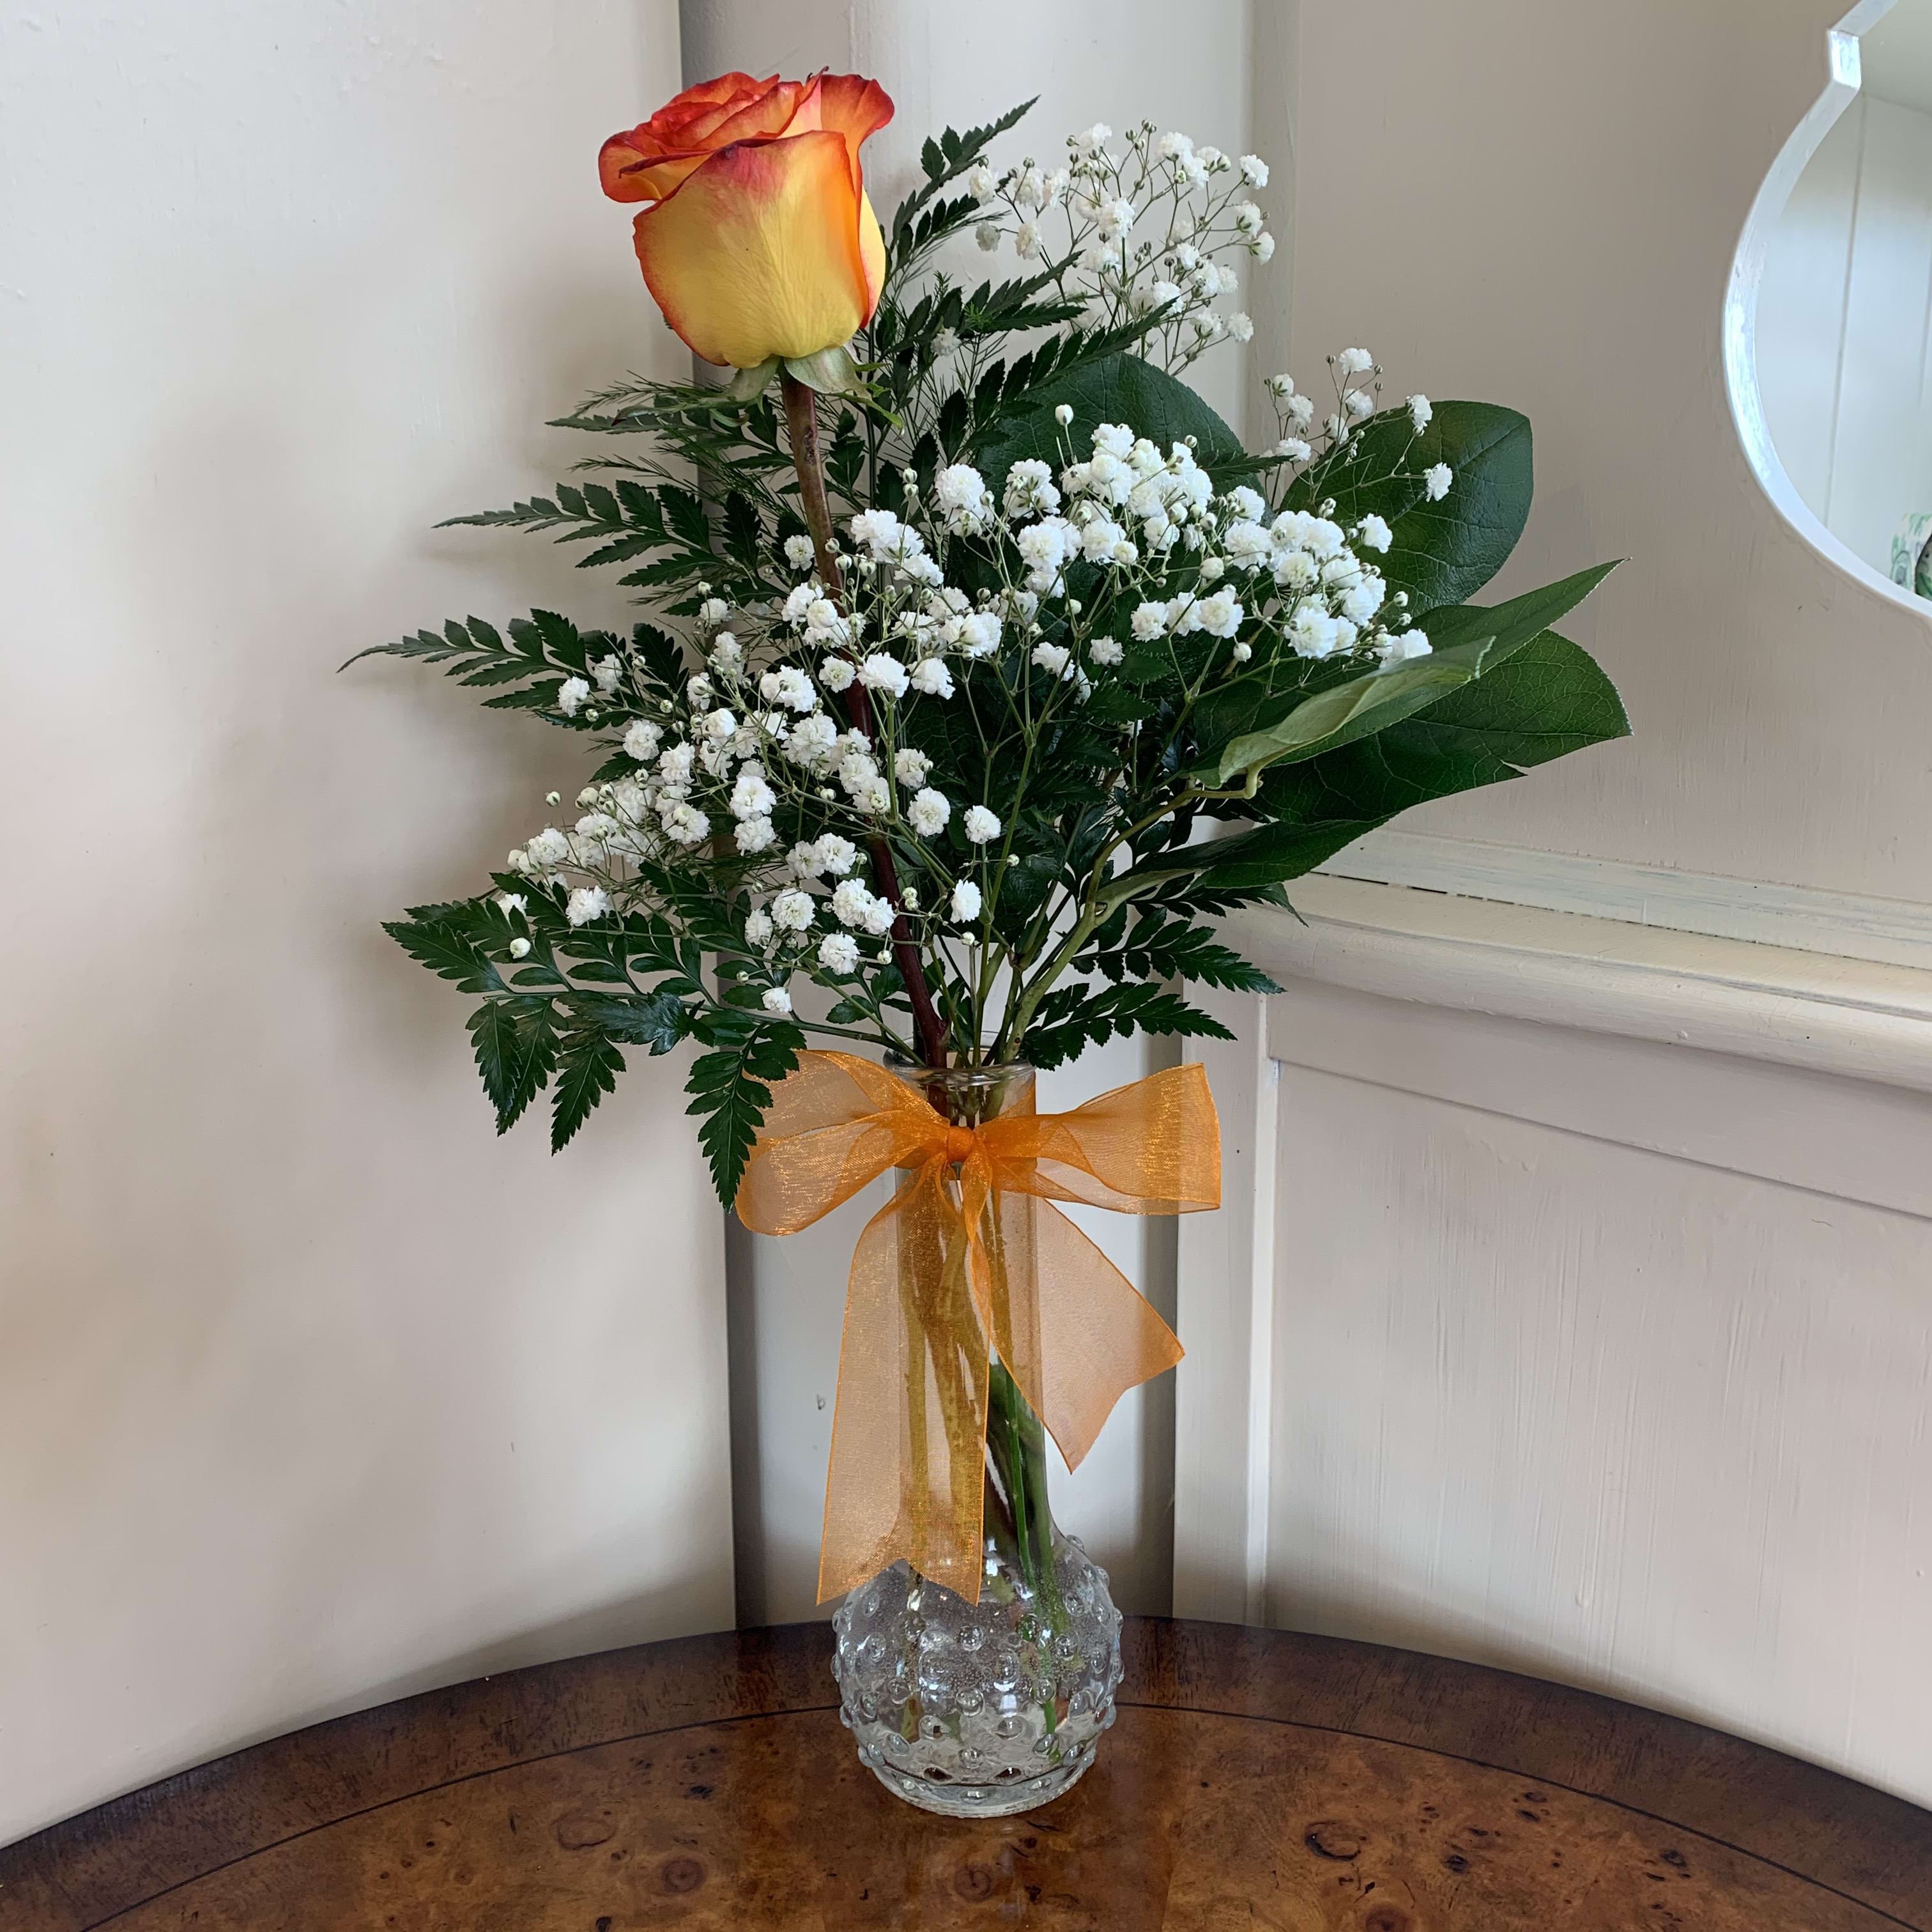 Circus Sweetheart Bud vase - &quot;Circus&quot; rose in bud vase with babysbreath, greens and orange organza bow 